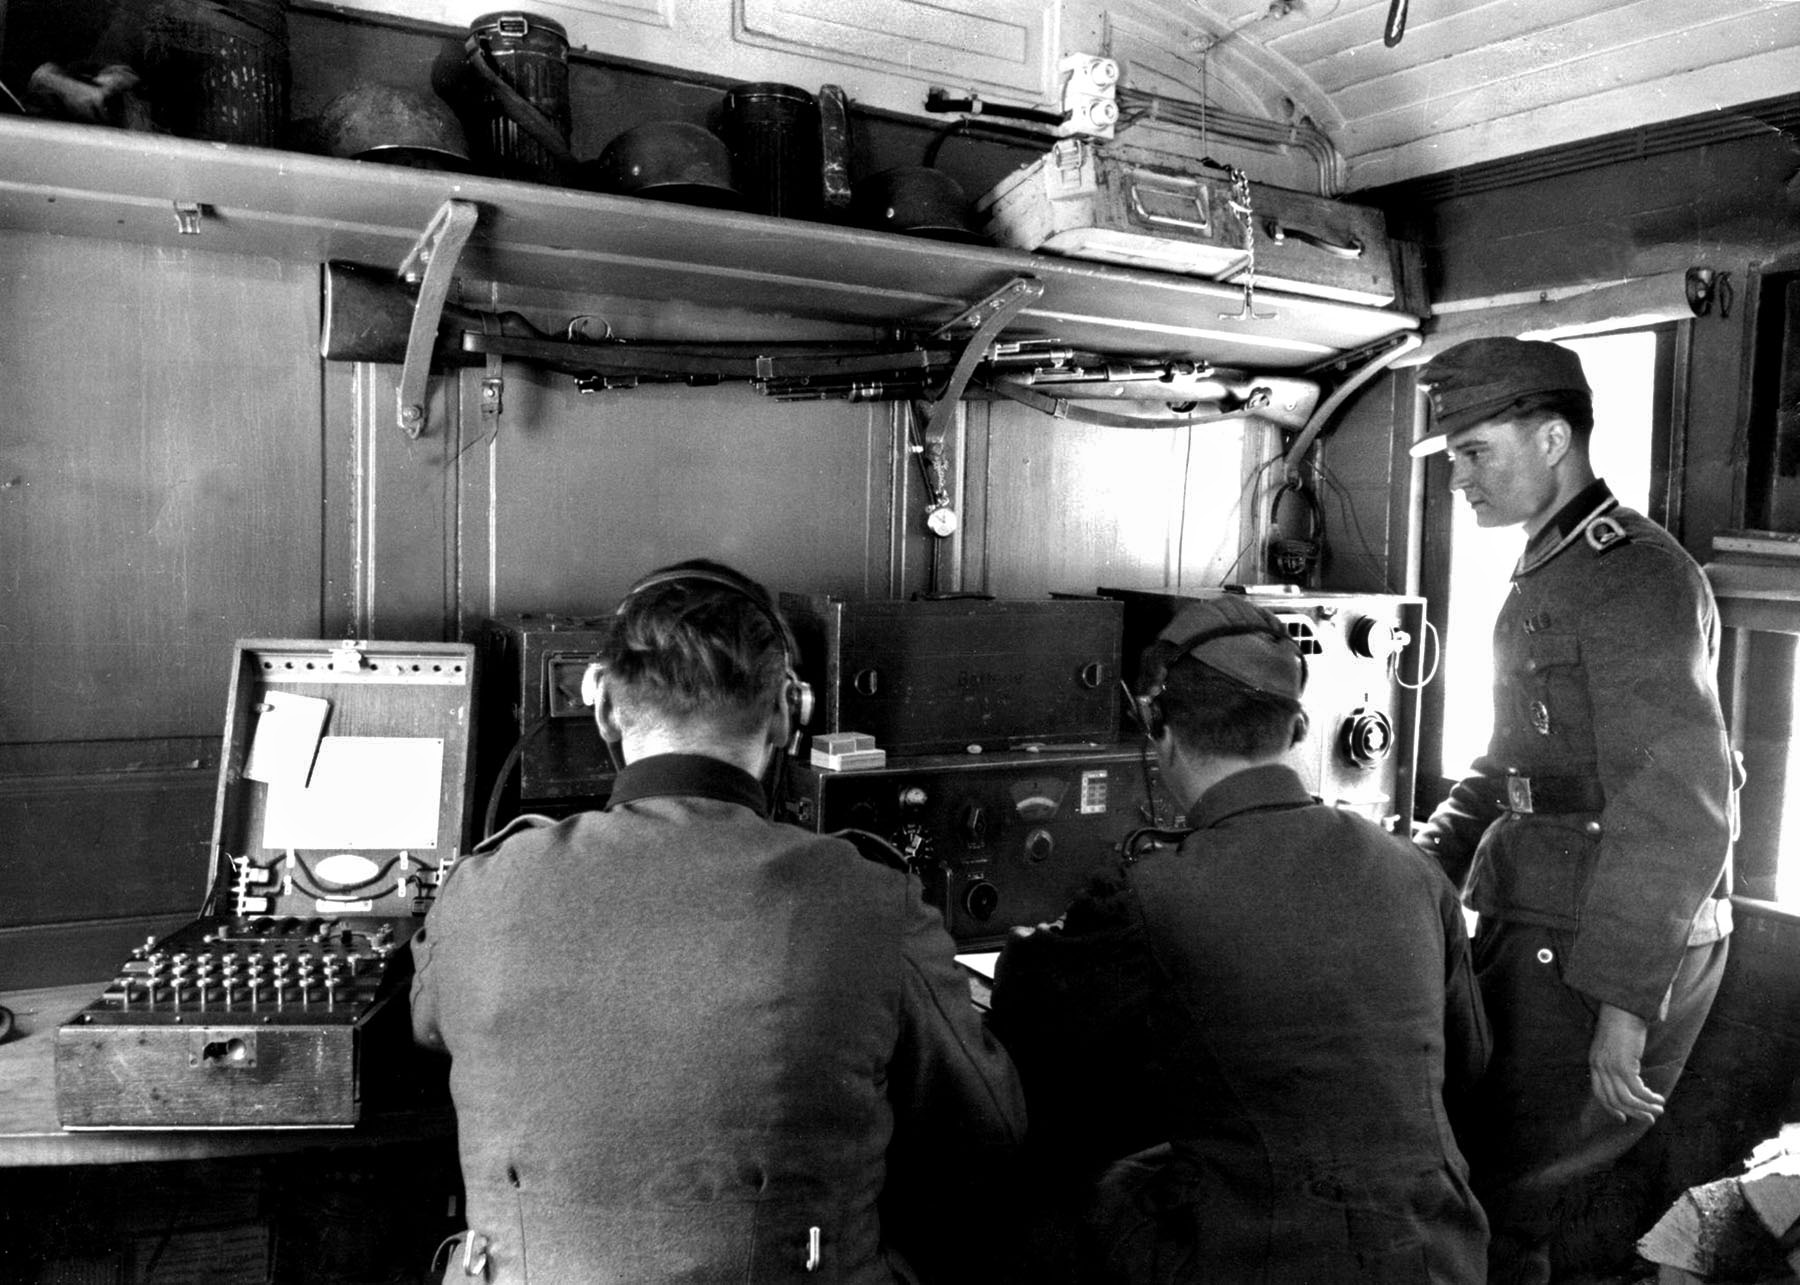 German soldiers operate the Enigma machine. British intelligence officials learned of Garbo’s existence through decrypted German radio messages.